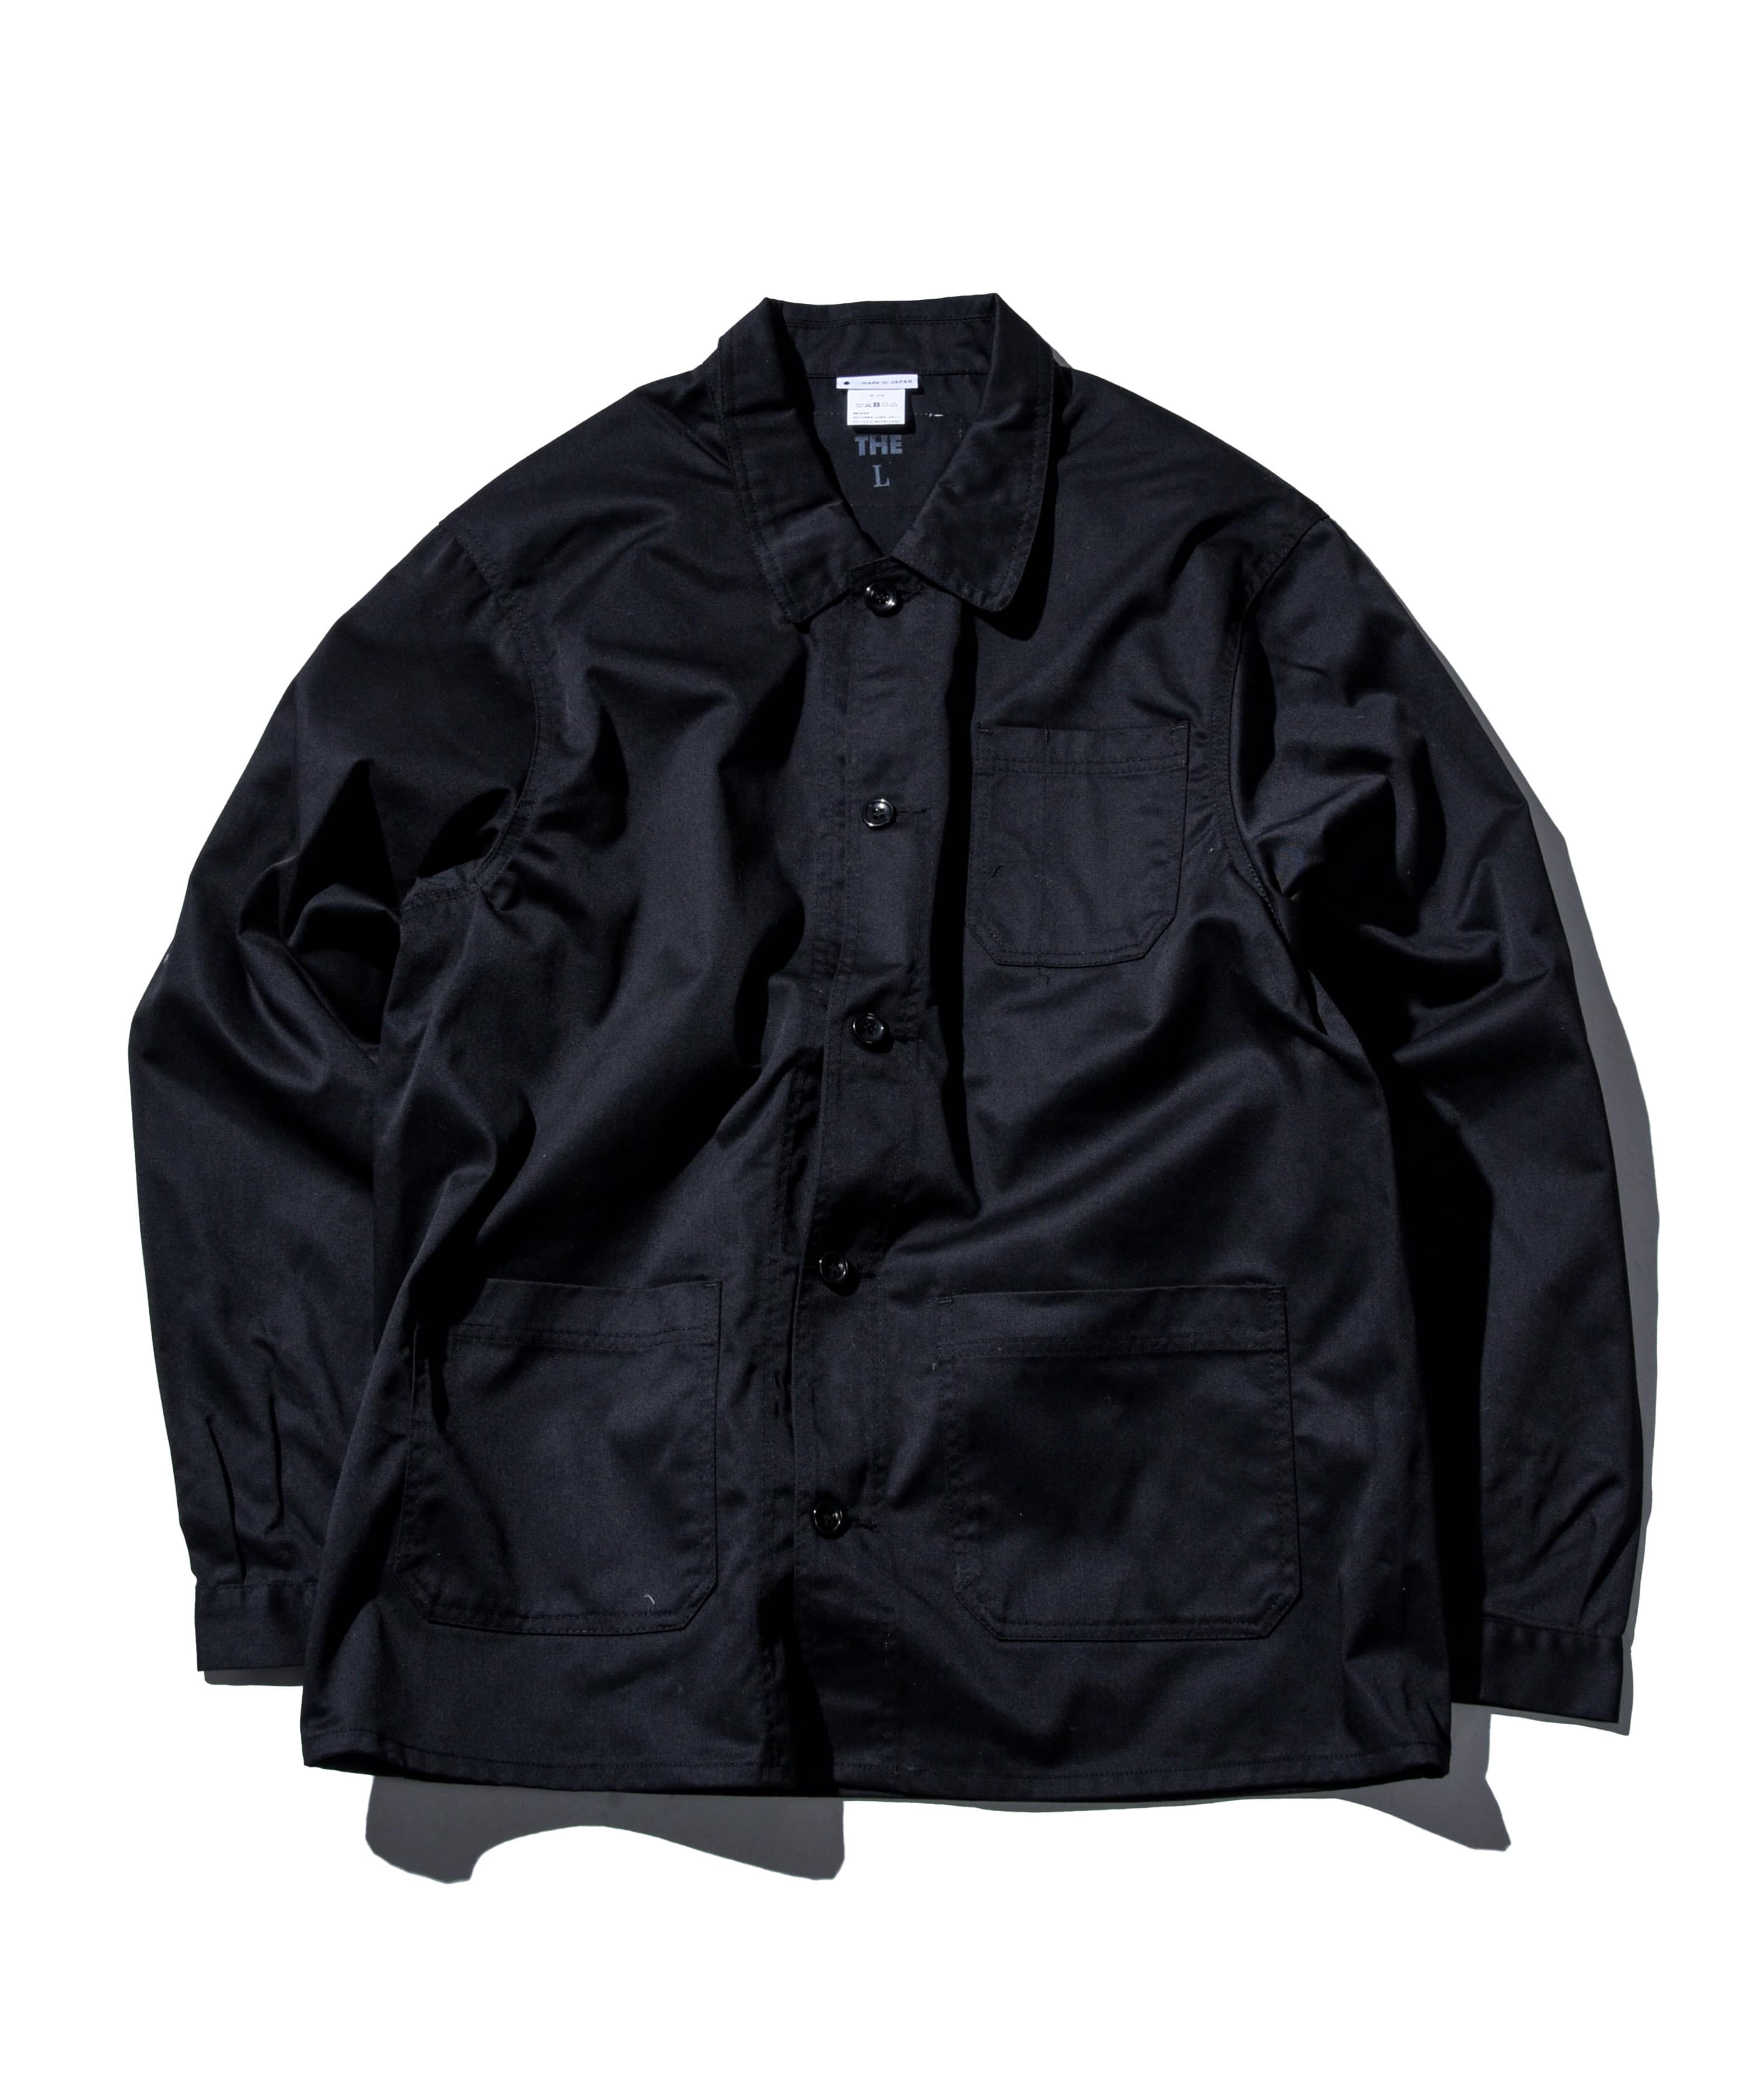 THE STORE COVERALL